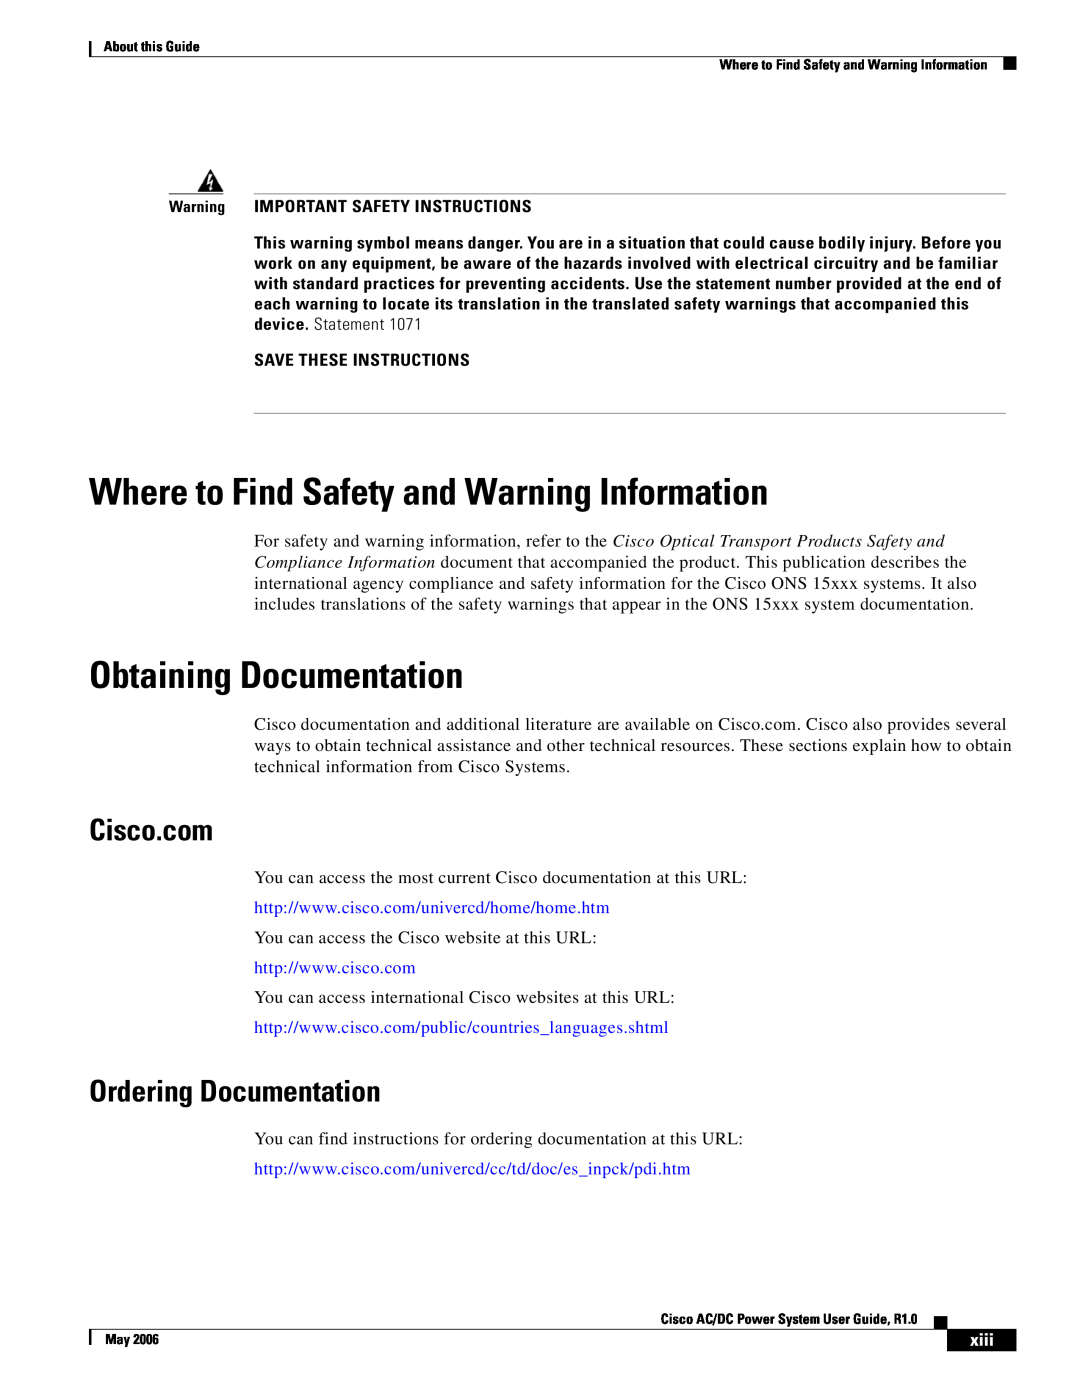 Cisco Systems 124778, 124792, 159330 manual Where to Find Safety and Warning Information, Obtaining Documentation, Cisco.com 